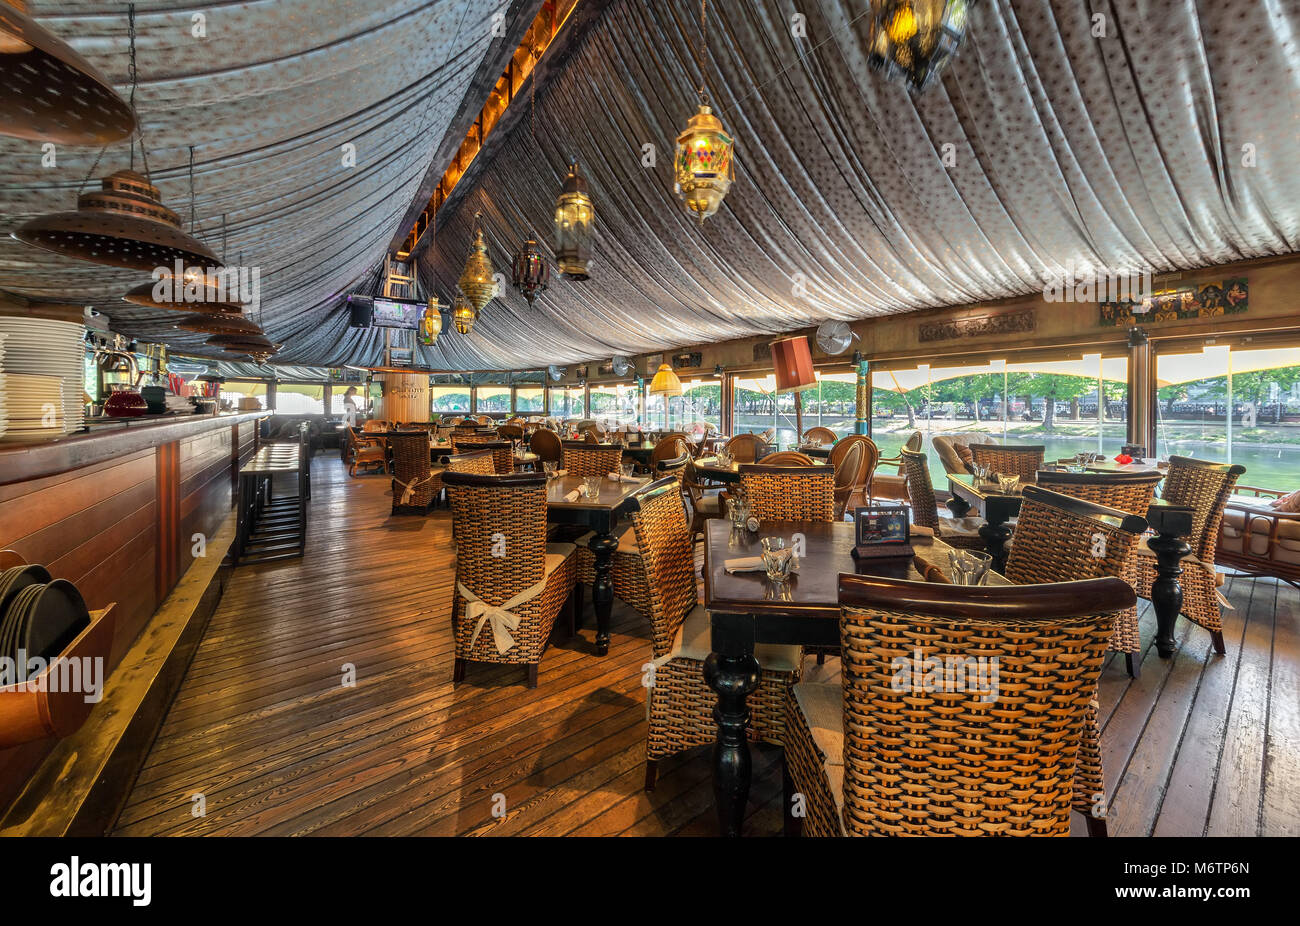 MOSCOW - JULY 2014: The interior of the restaurant on the water 'SHATER' in the Oriental style Stock Photo